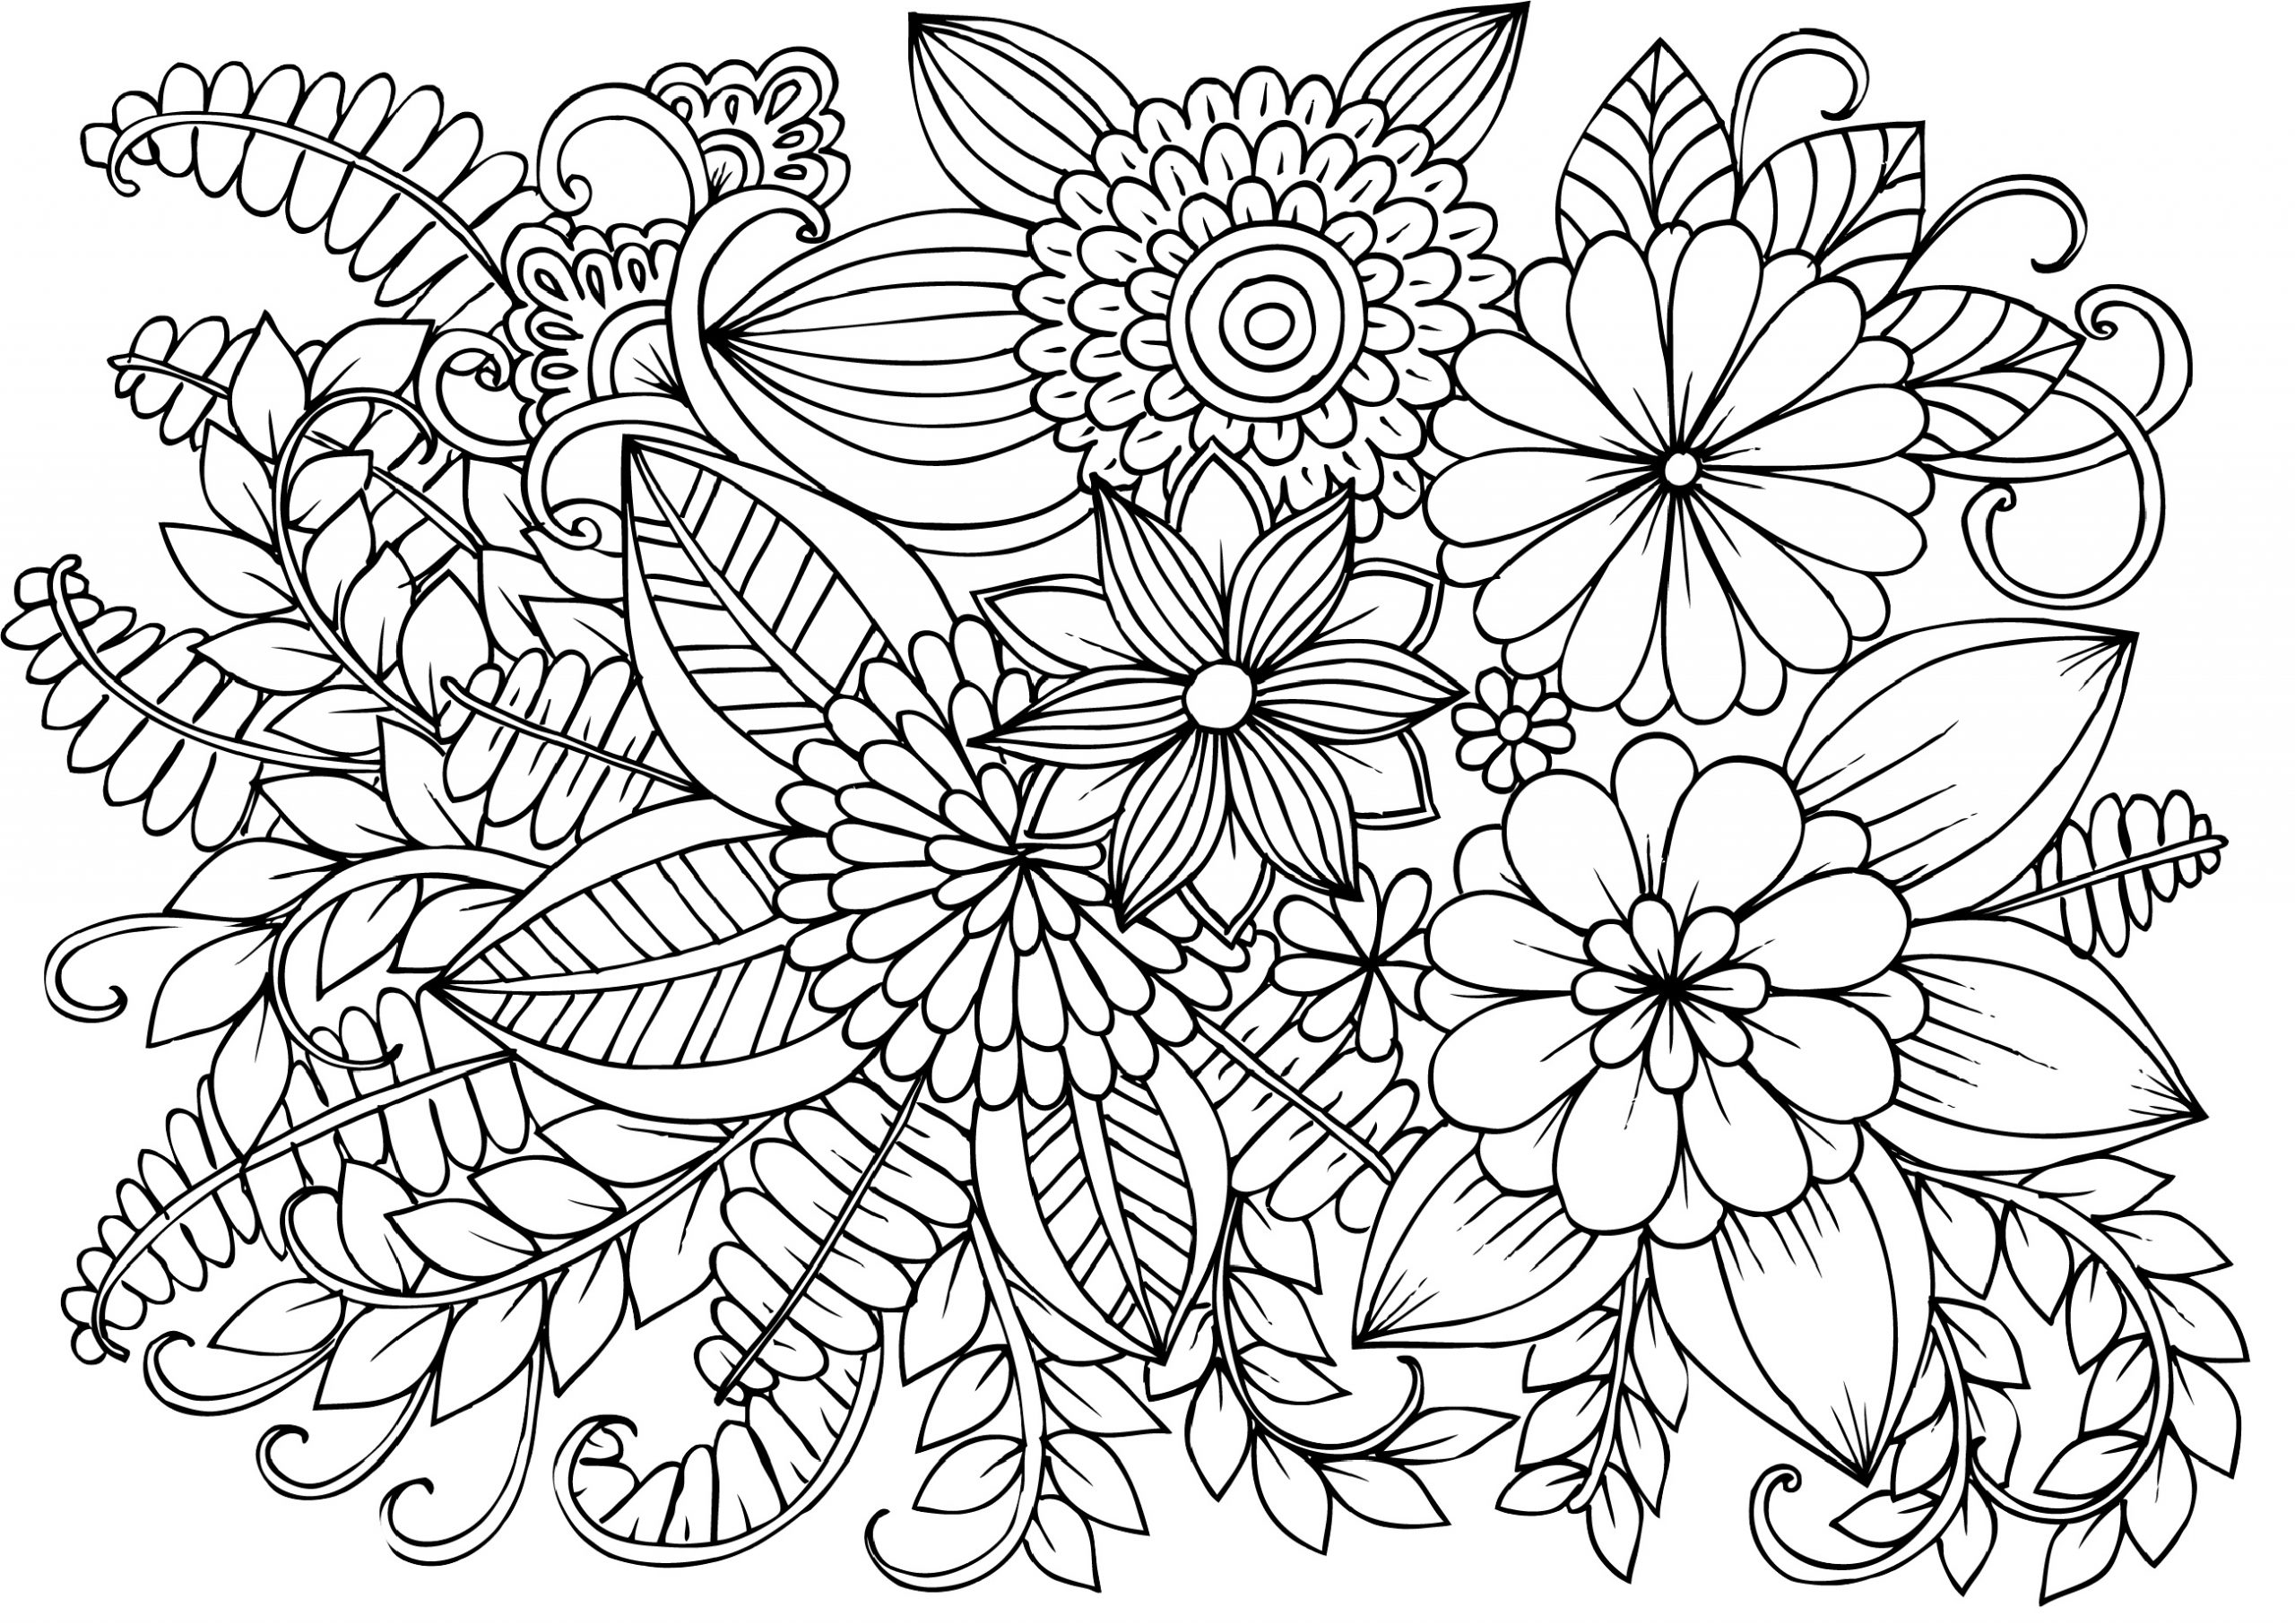 Flower Coloring Pages For Adults To Print Boringpop